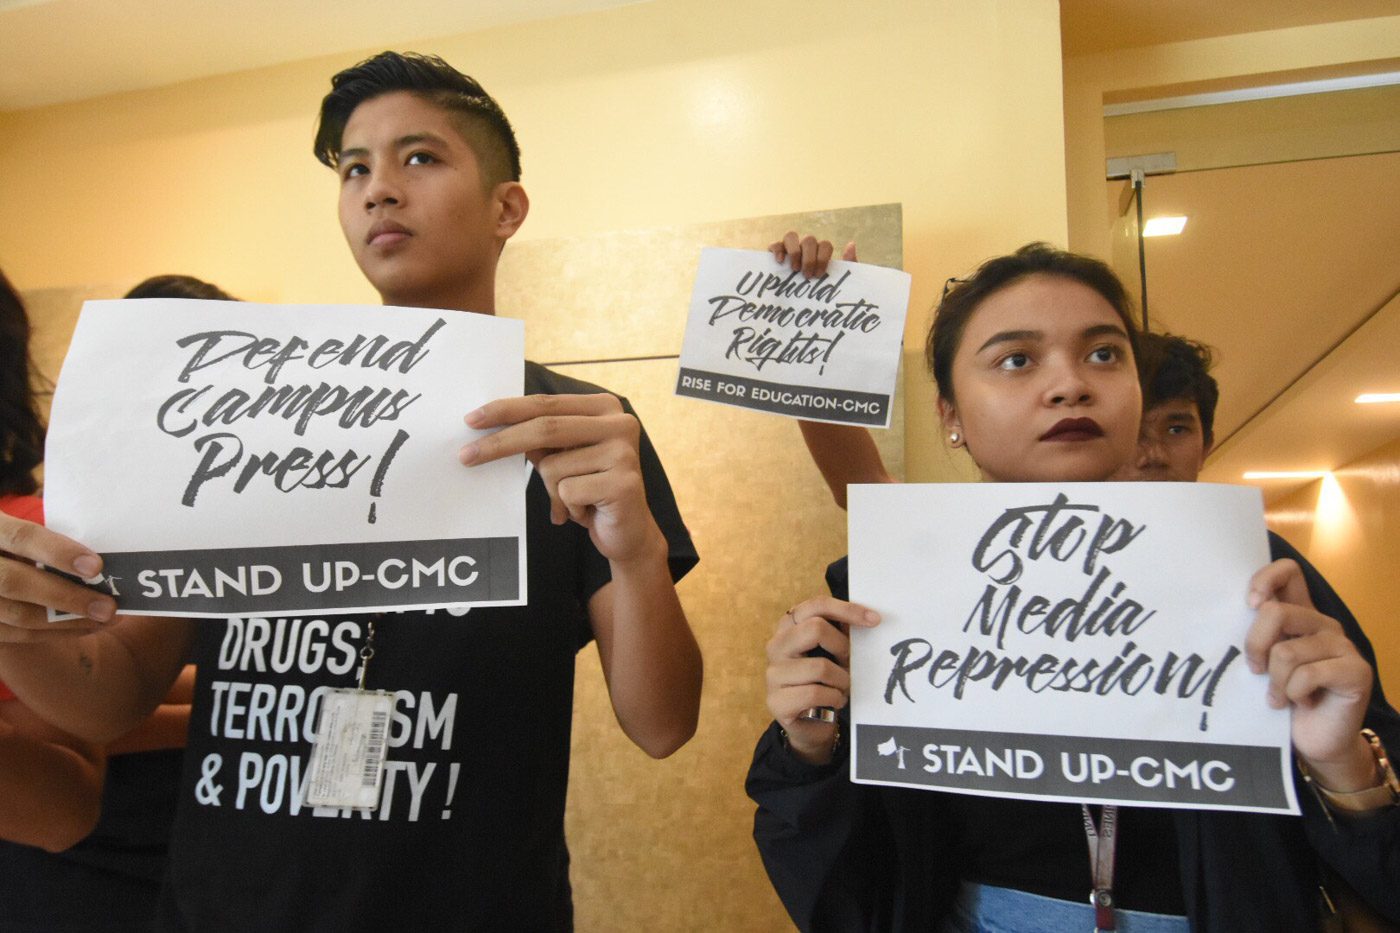 STOP MEDIA REPRESSION. UP Diliman College of Mass Communications students holds a protest against the oppression of media by the Duterte government. Photo by Angie de Silva/Rappler 